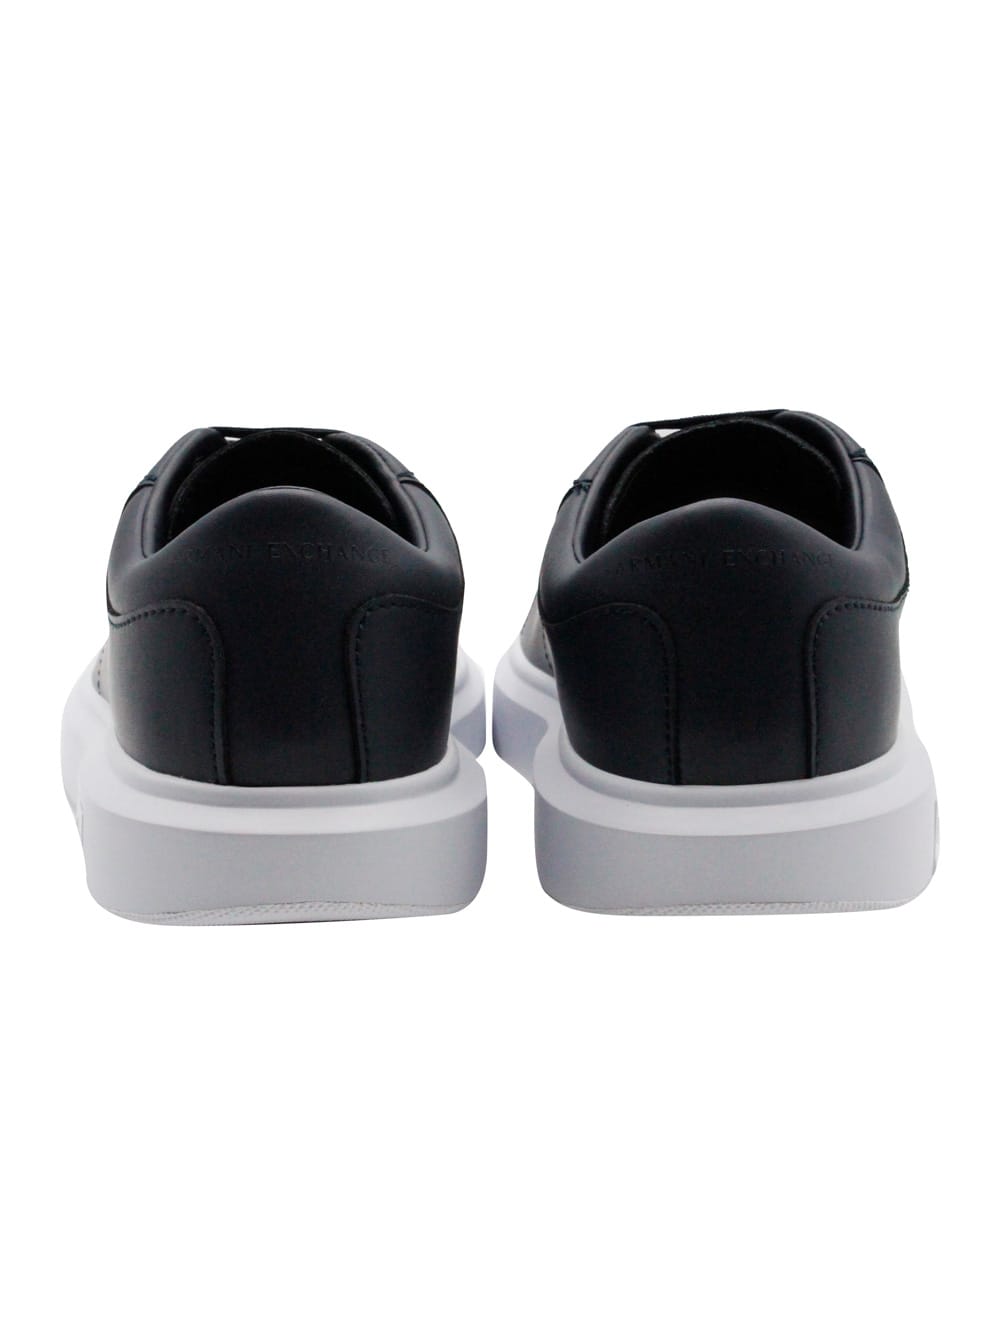 Shop Armani Collezioni Leather Sneakers With Matching Box Sole And Lace Closure. Small Logo On The Tongue And Back In Blu